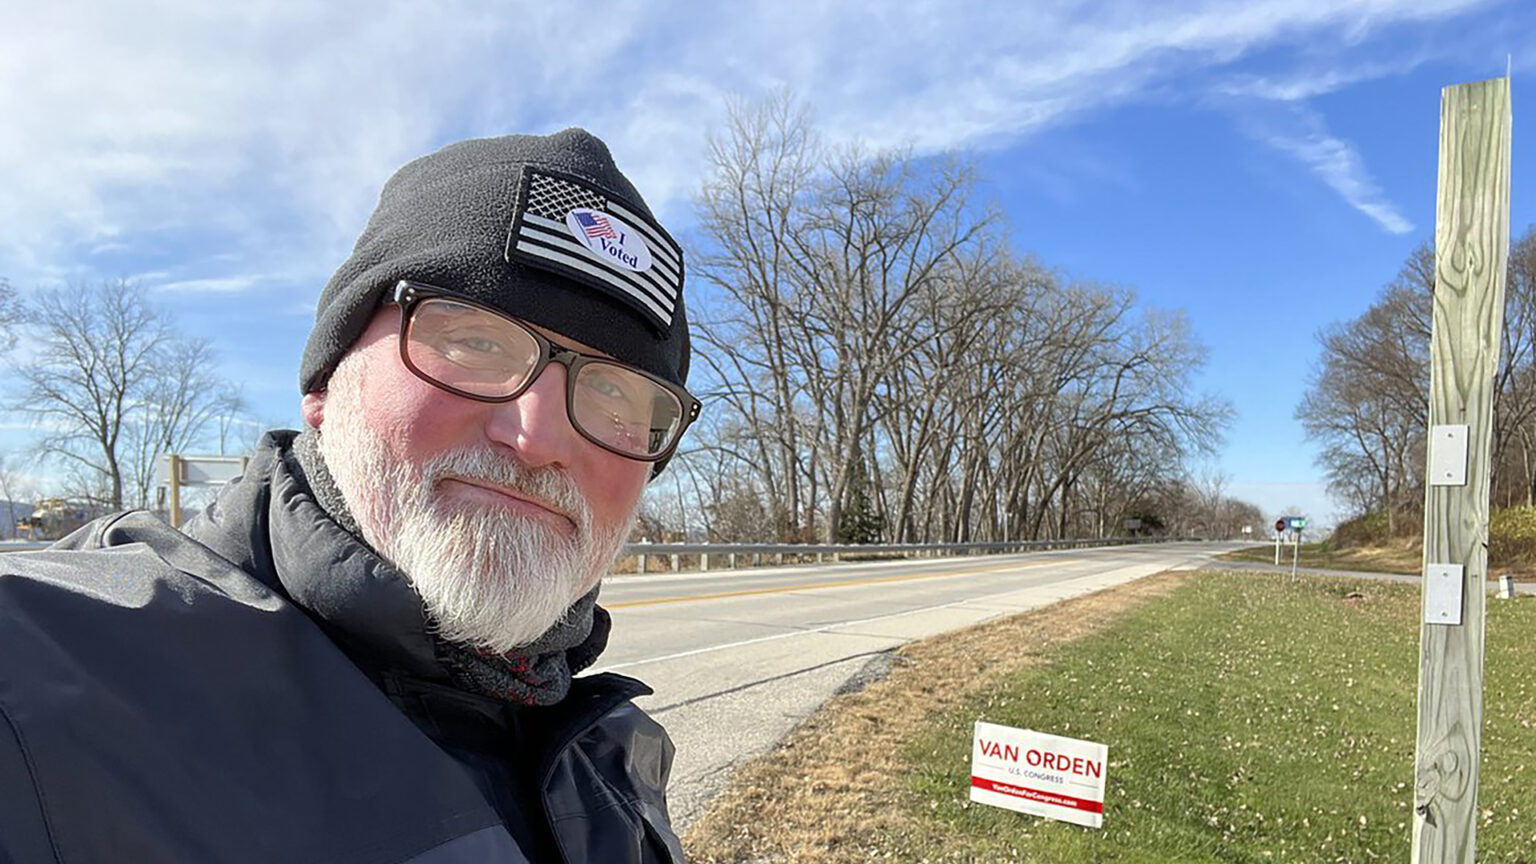 Derrick Van Orden poses for a selfie while standing next to the side of a road, with a campaign sign and trees in the background.